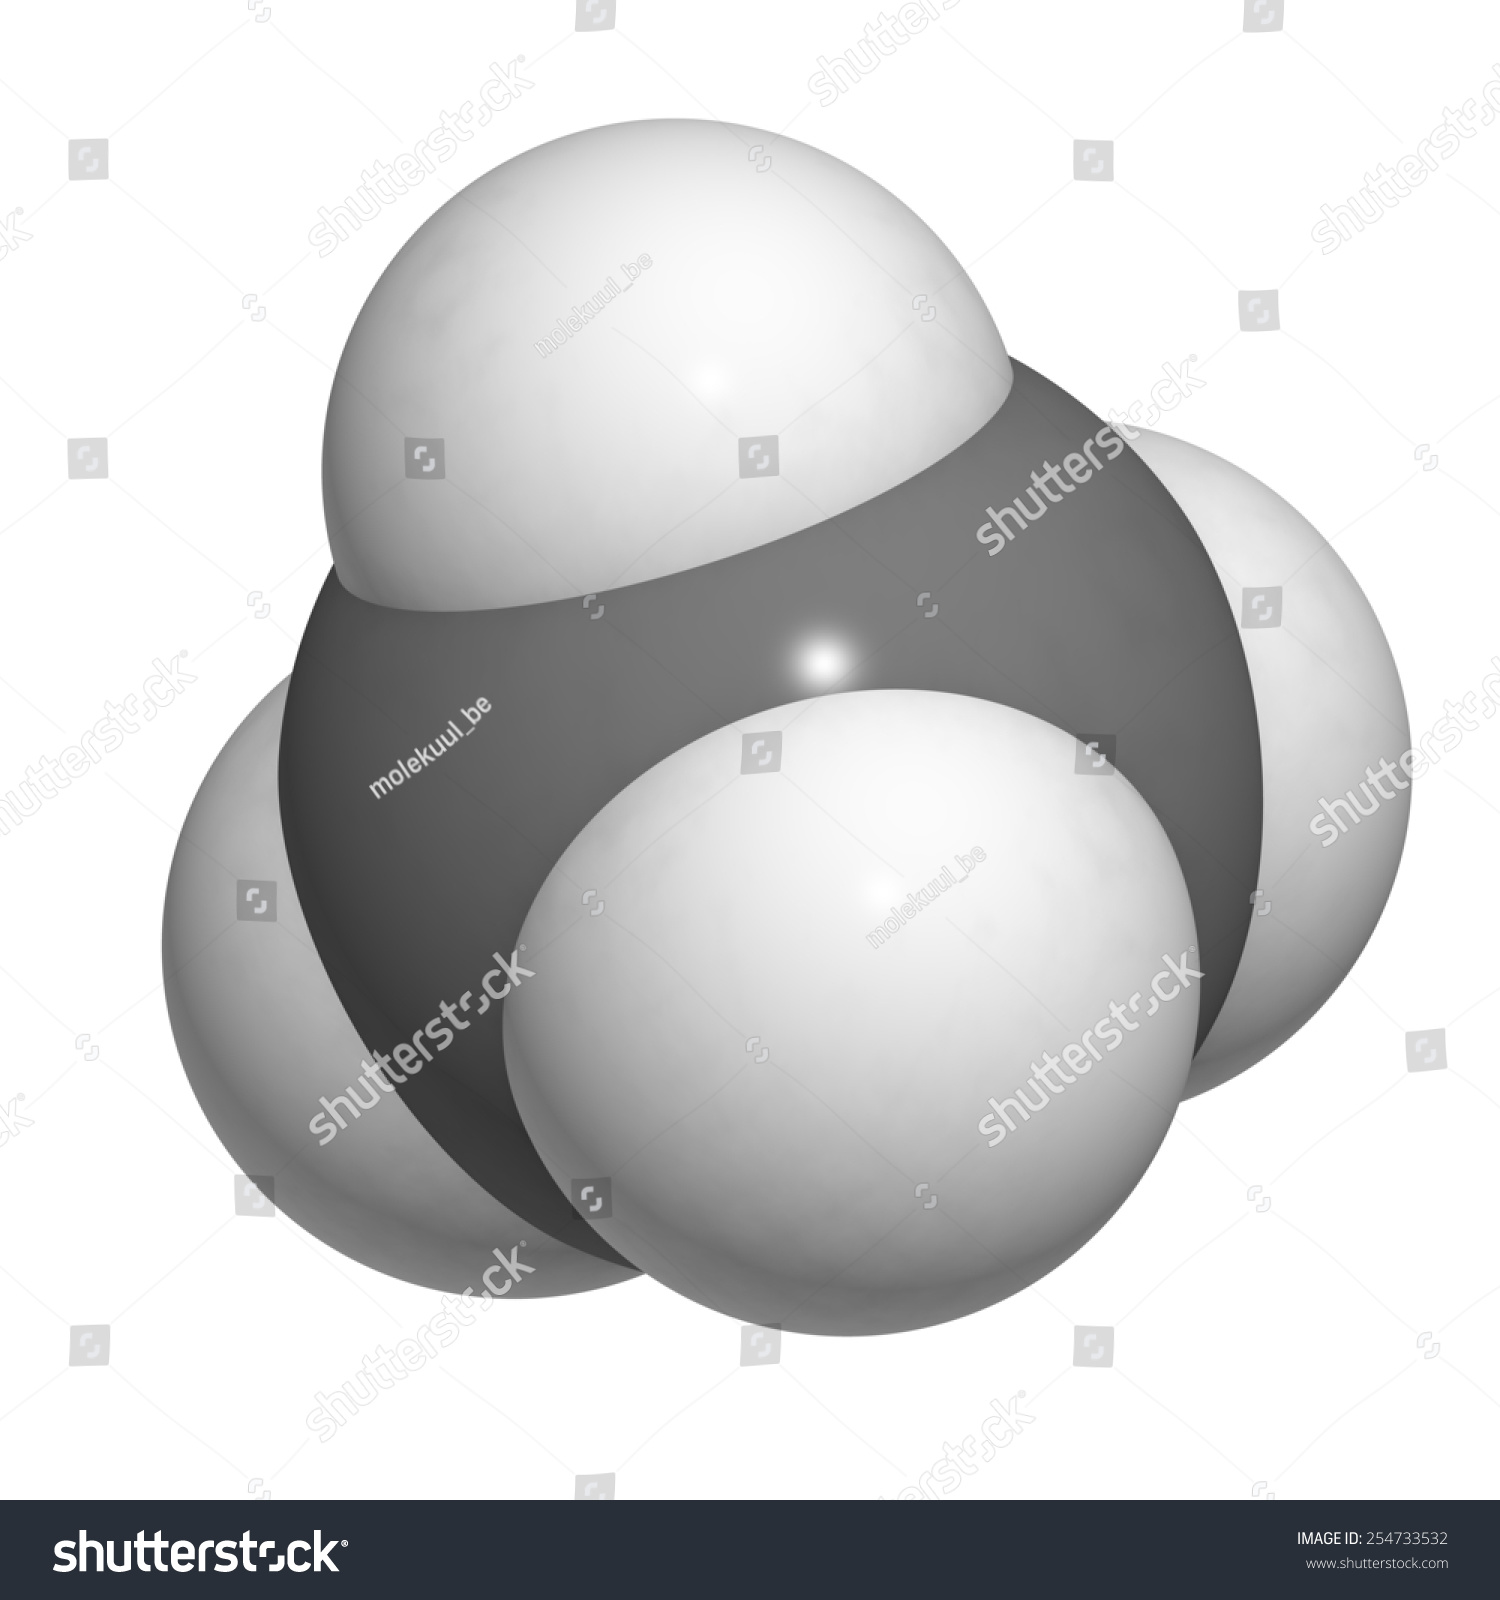 Methane Ch4 Gas Molecule Chemical Structure Stock Illustration 254733532